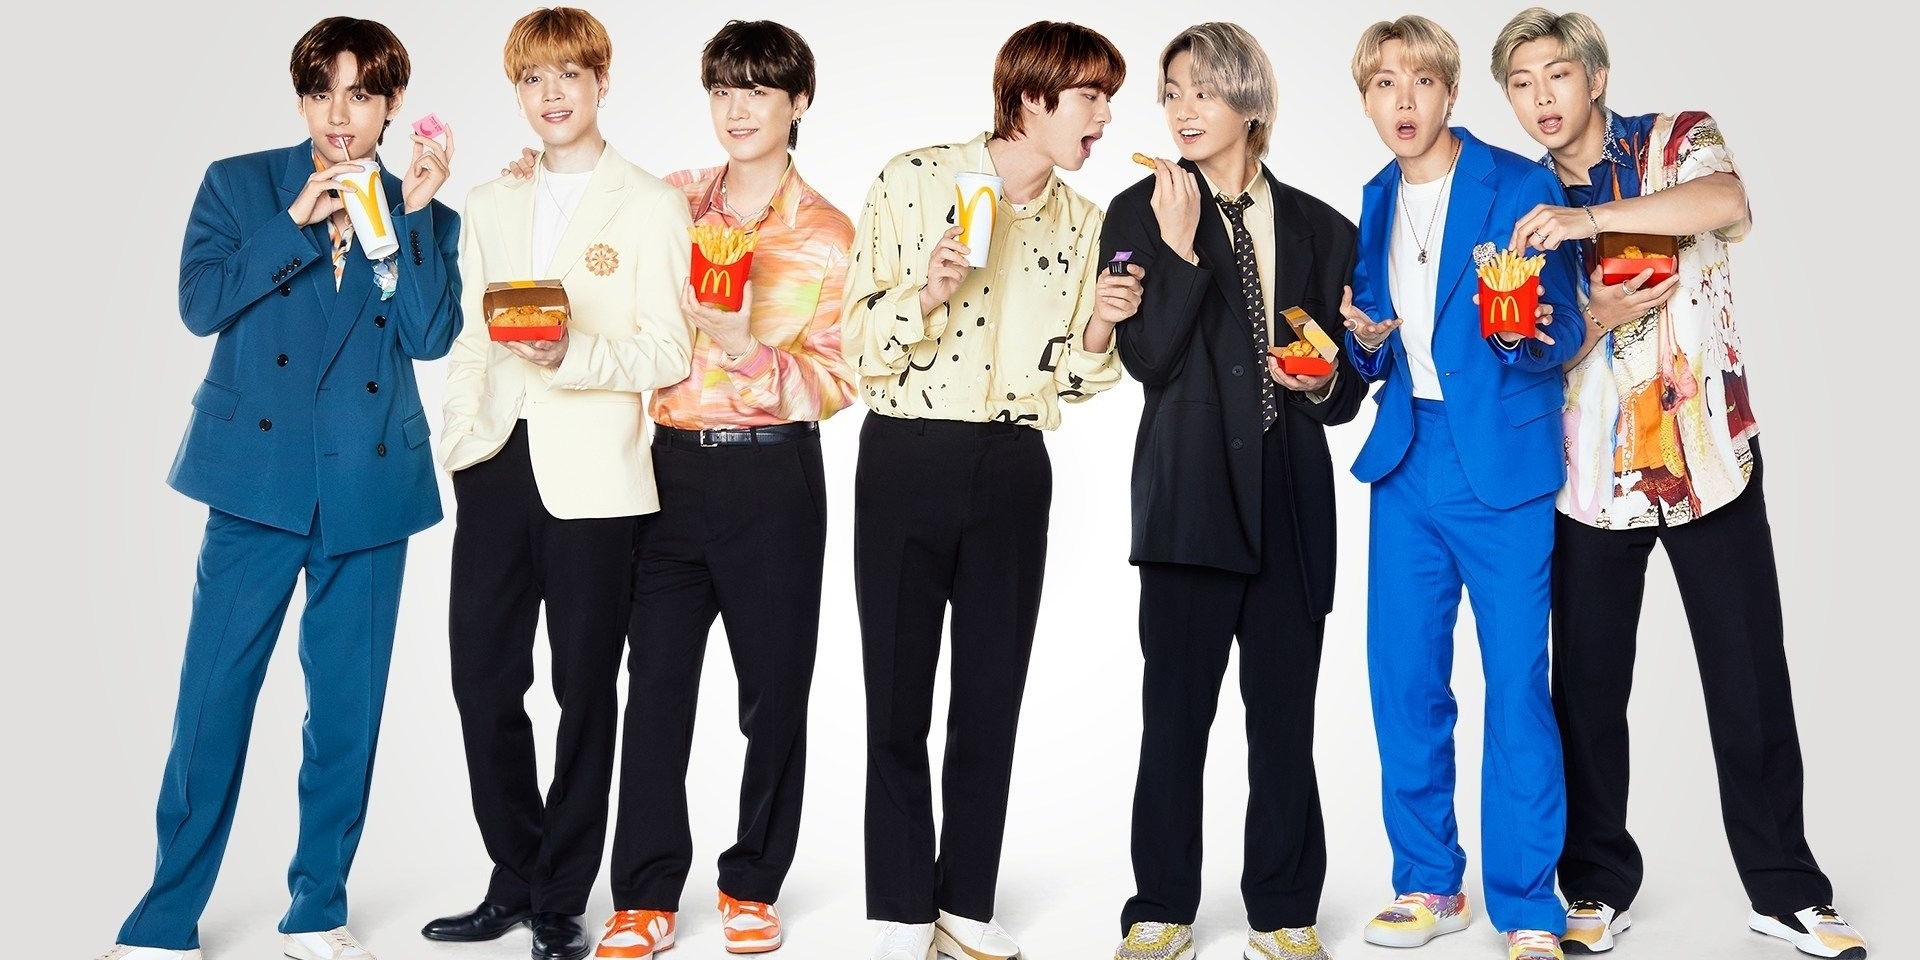 The BTS Meal is coming to the Philippines, here's what you need to know